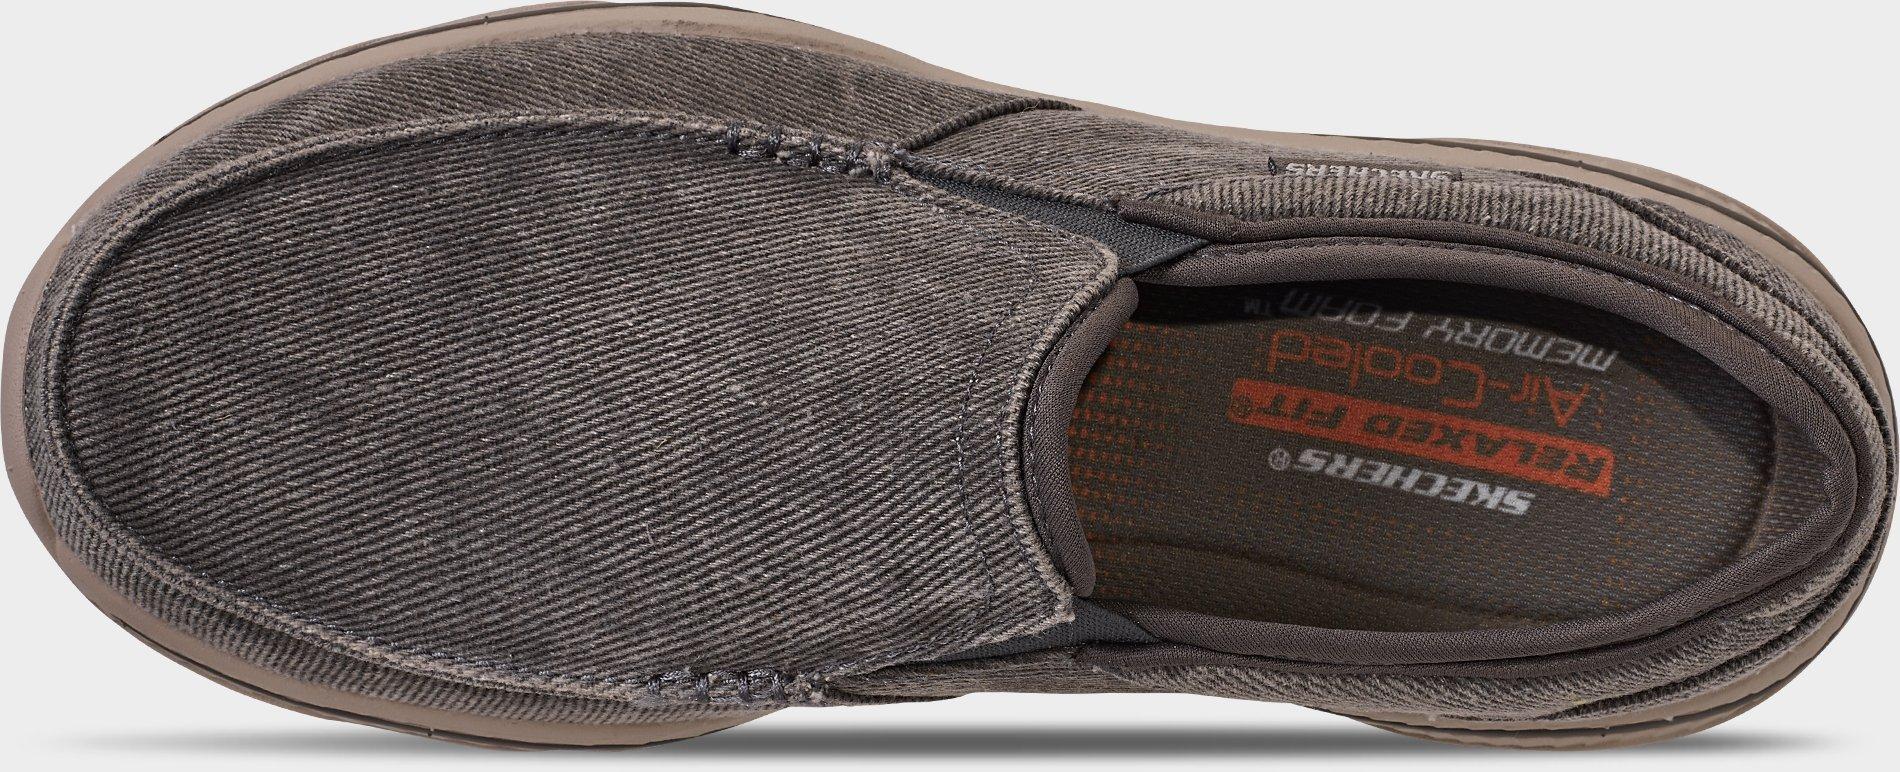 skechers slip on casual shoes mens